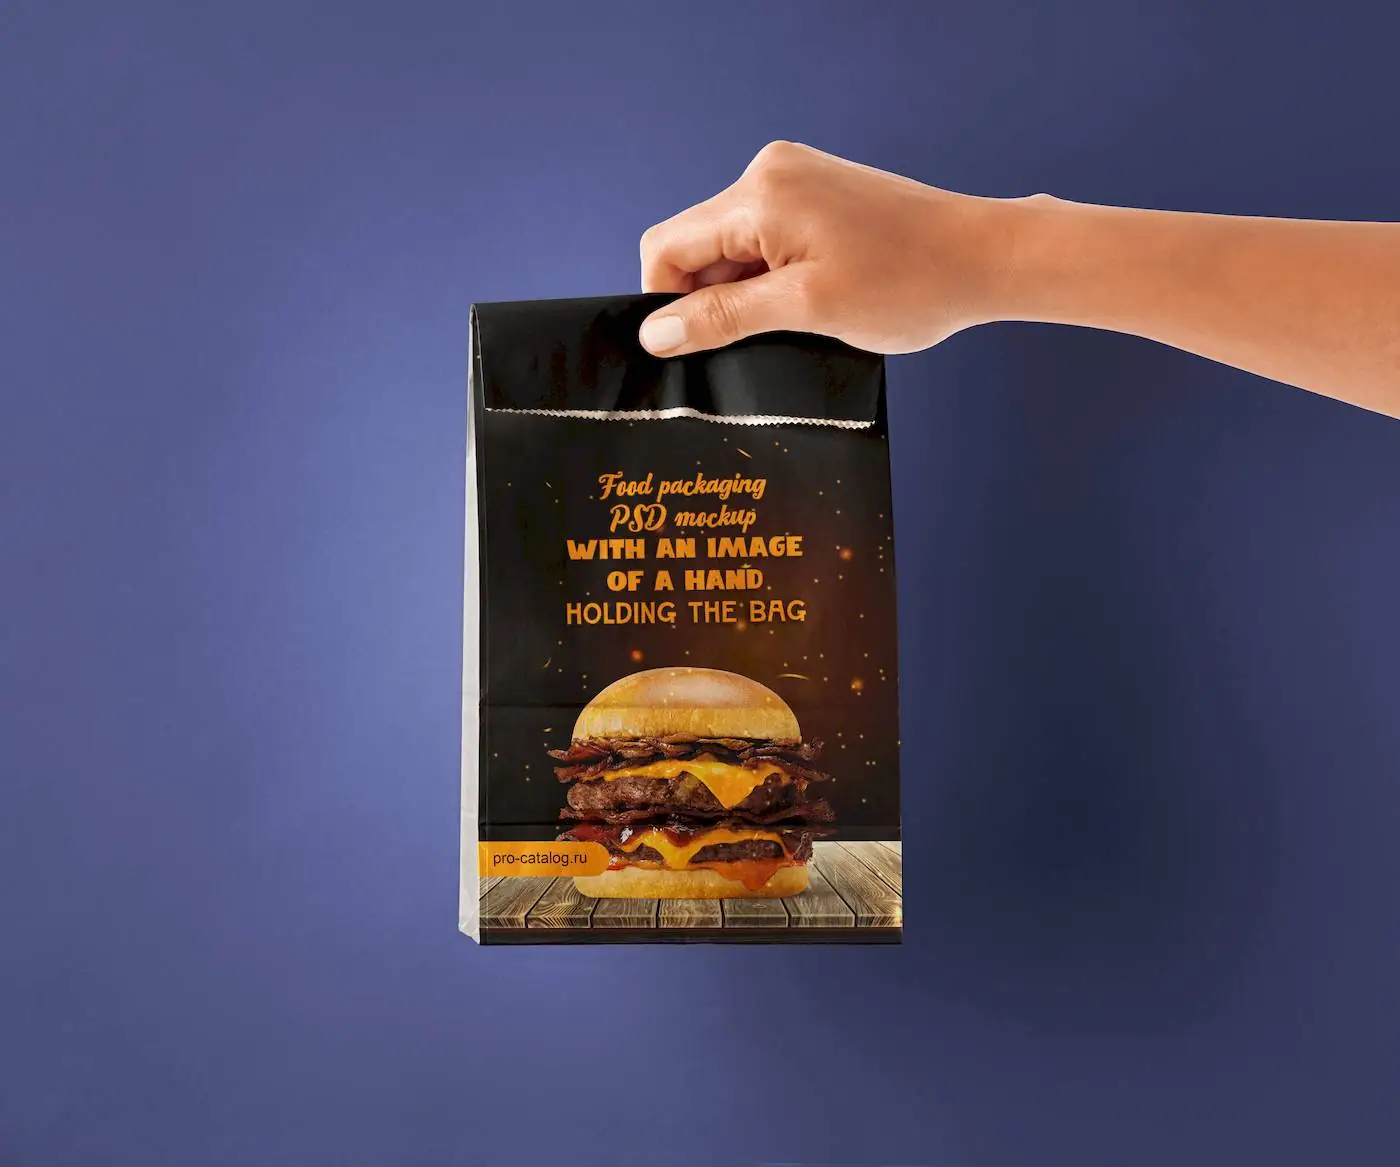 Free Food packaging PSD mockup with an image of a hand holding the bag